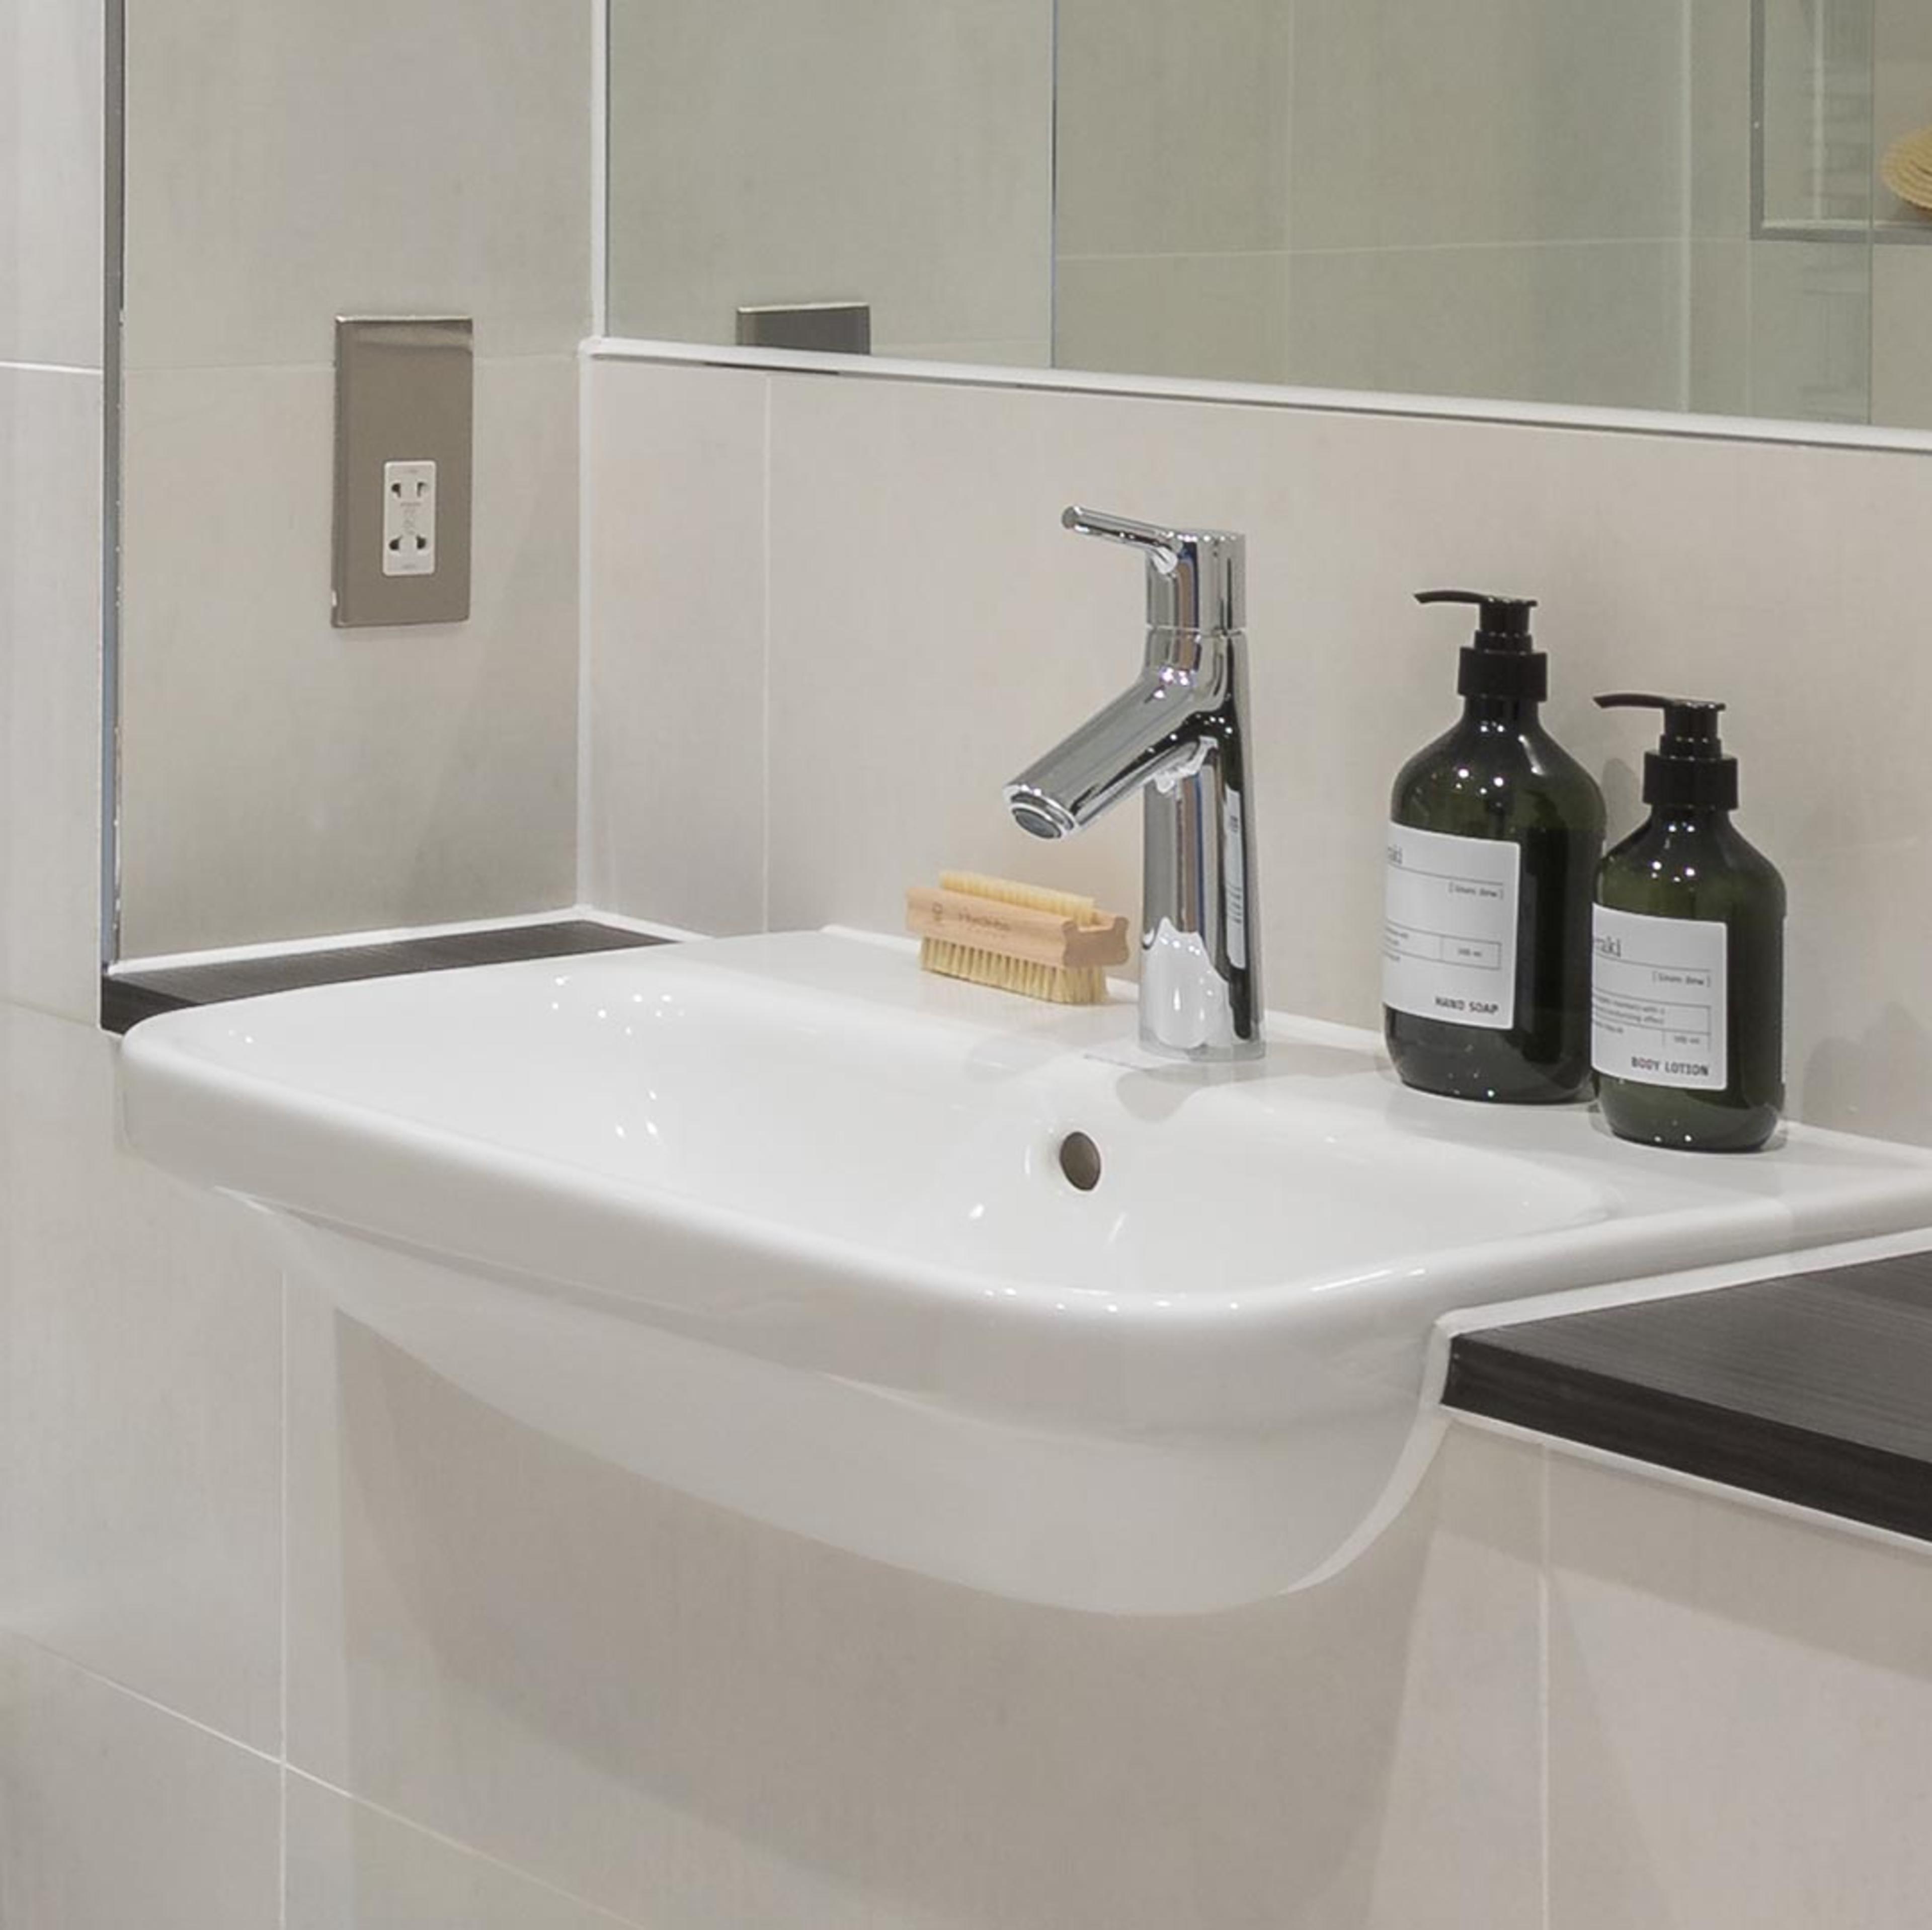 A white sink with chrome mixer tap in a cream tiled bathroom with a mirror behind. Bottles of facewash/handwash stand on the sink.